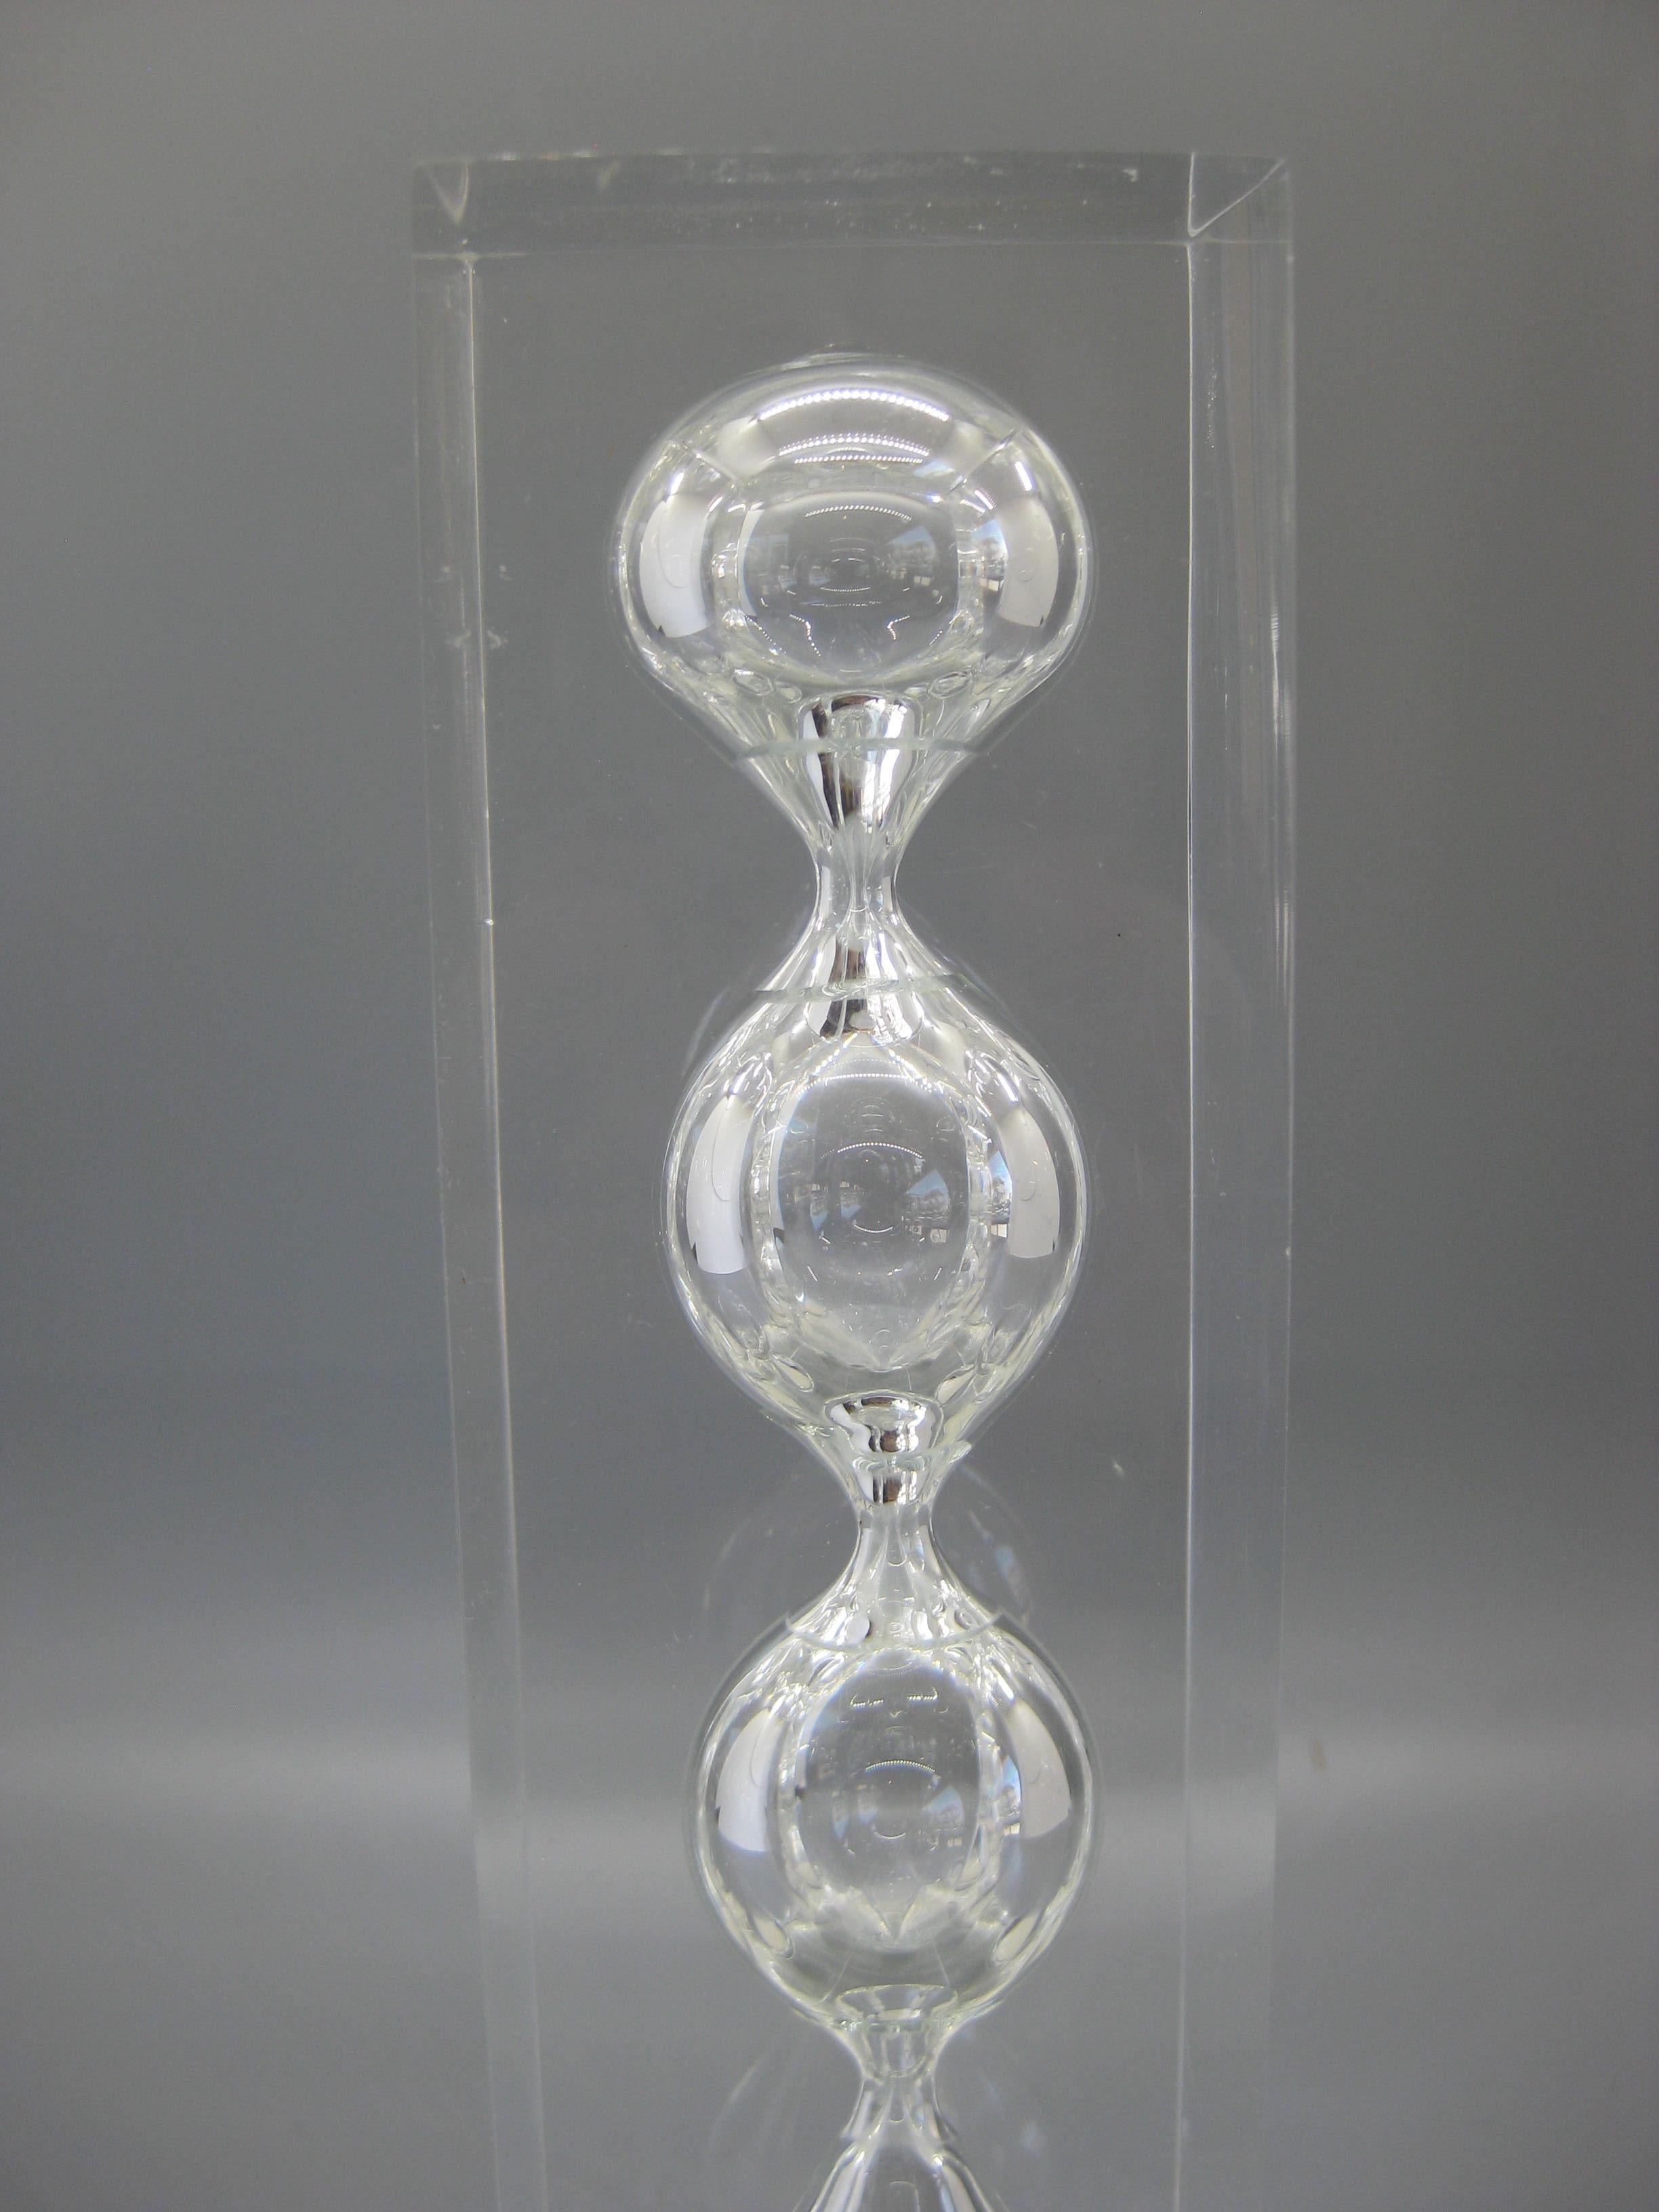 Seldom seen four bubble Lucite hourglass sand timer sculpture dating from the 1970s. In the manner of Charles Hollis Jones. No maker marks. The sand timer works as it should. In very nice original condition with some light surface scratches on the